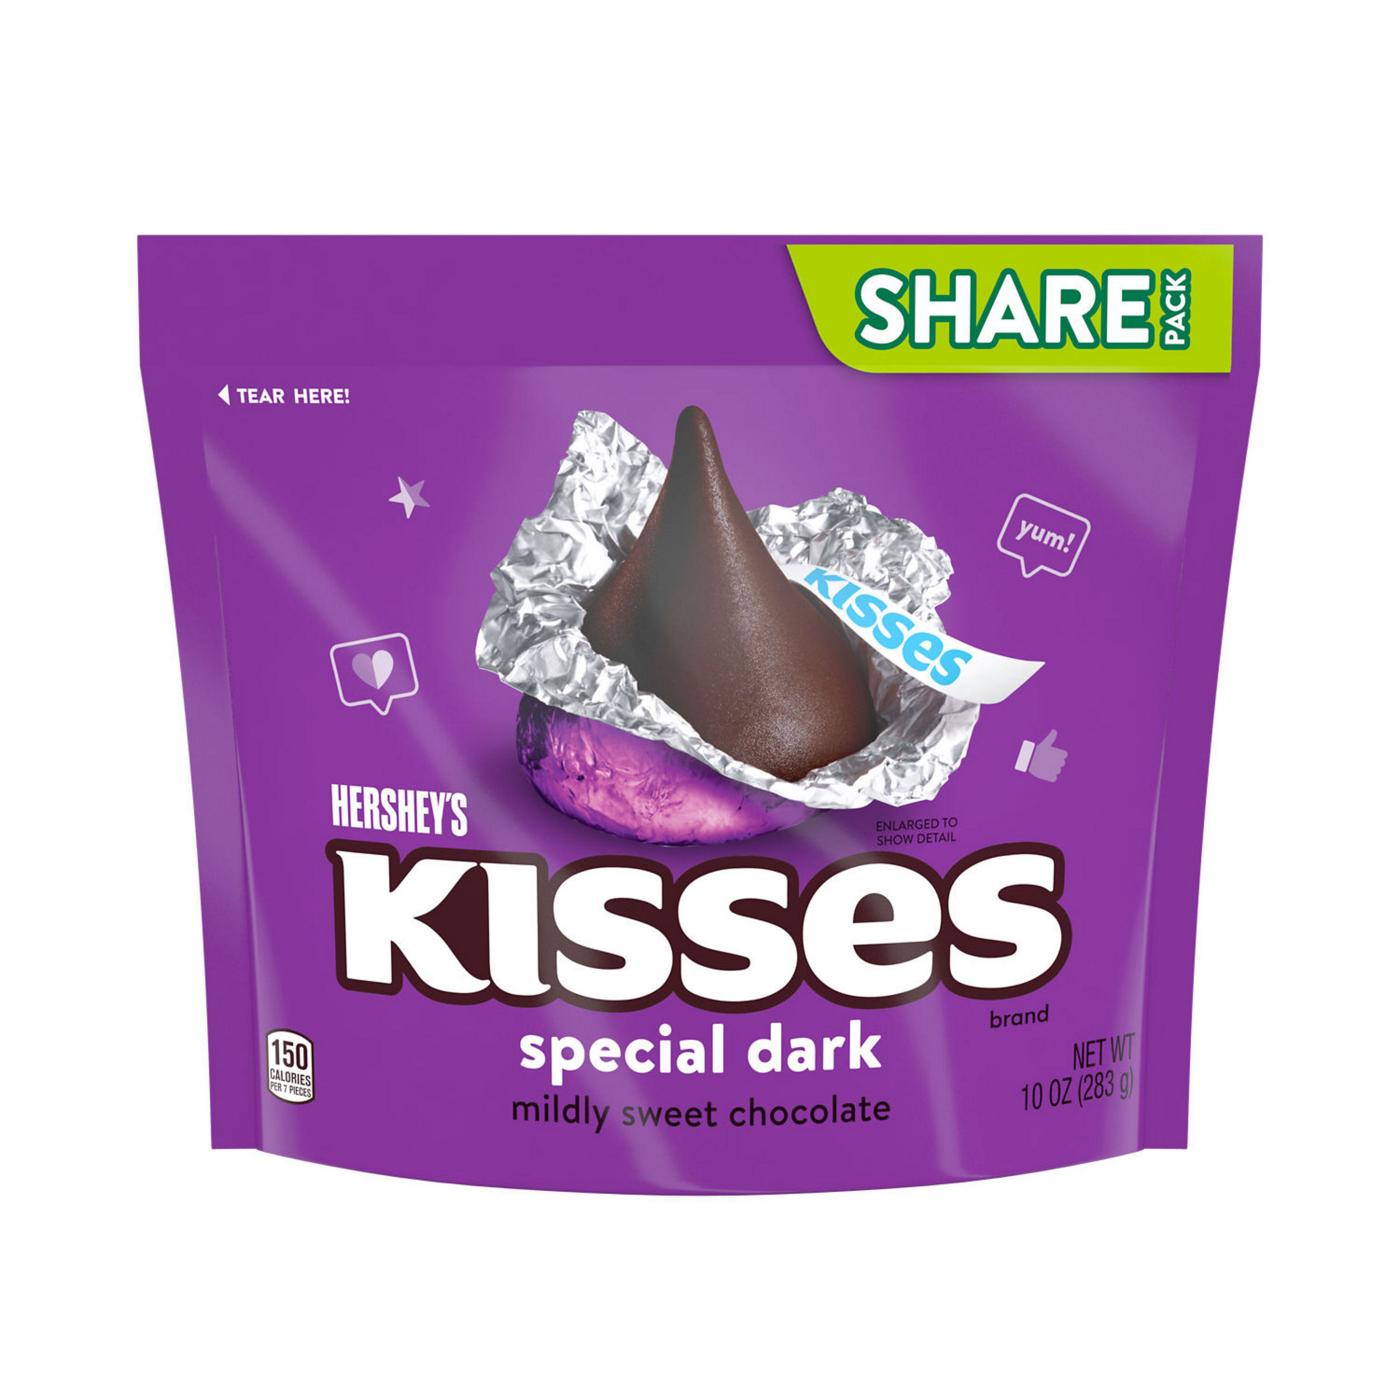 Hershey's Kisses Special Dark Mildly Sweet Chocolate Candy - Share Pack; image 1 of 6